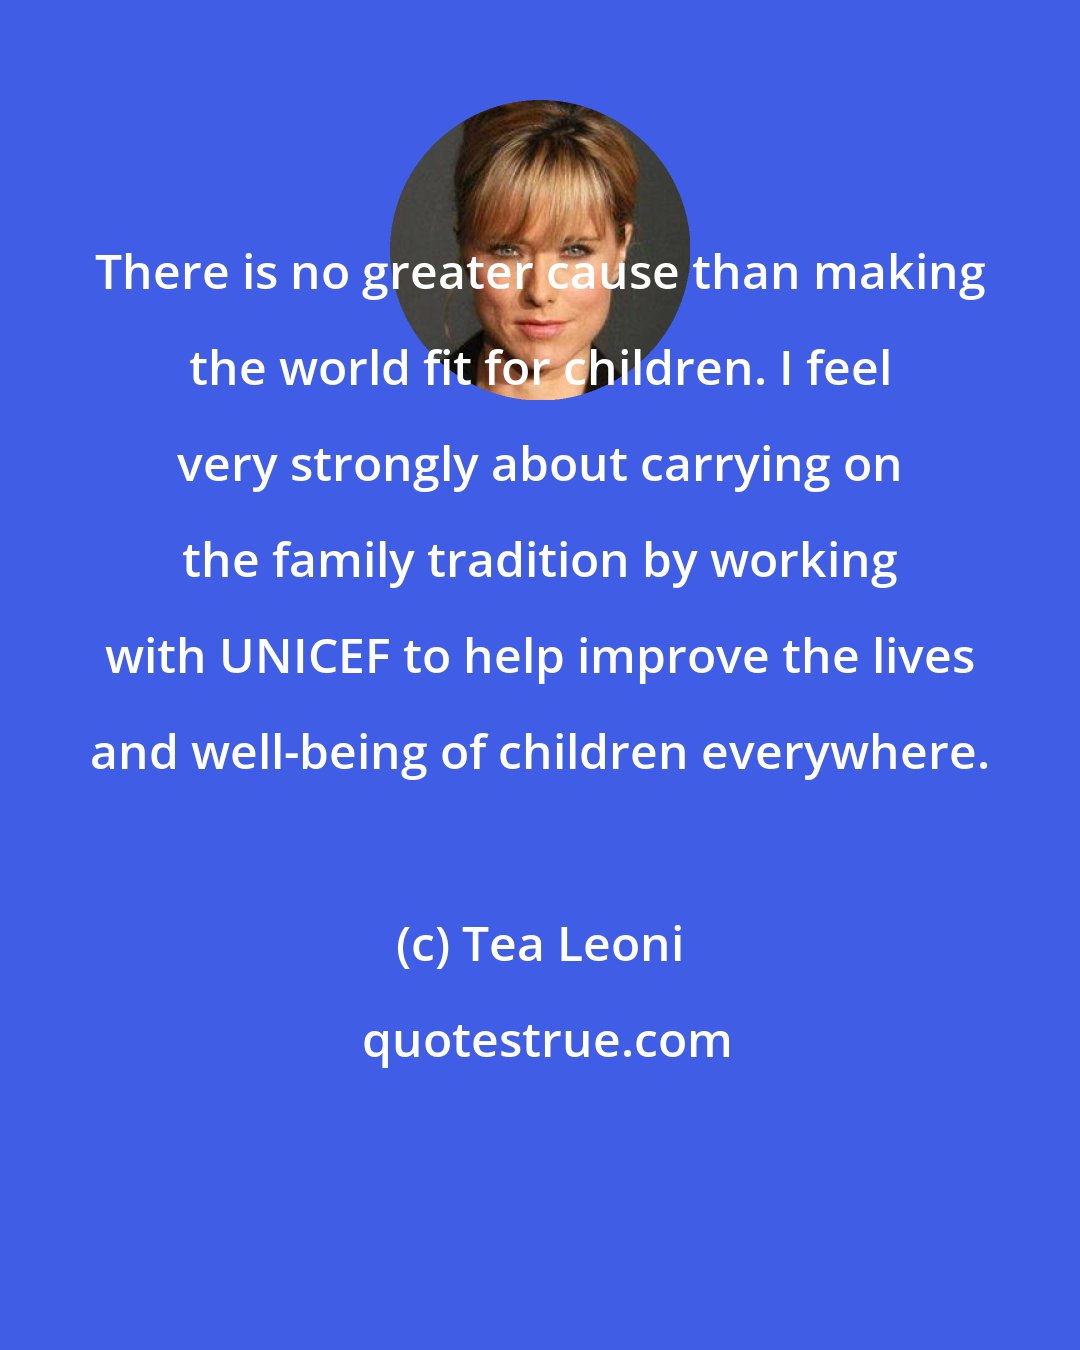 Tea Leoni: There is no greater cause than making the world fit for children. I feel very strongly about carrying on the family tradition by working with UNICEF to help improve the lives and well-being of children everywhere.